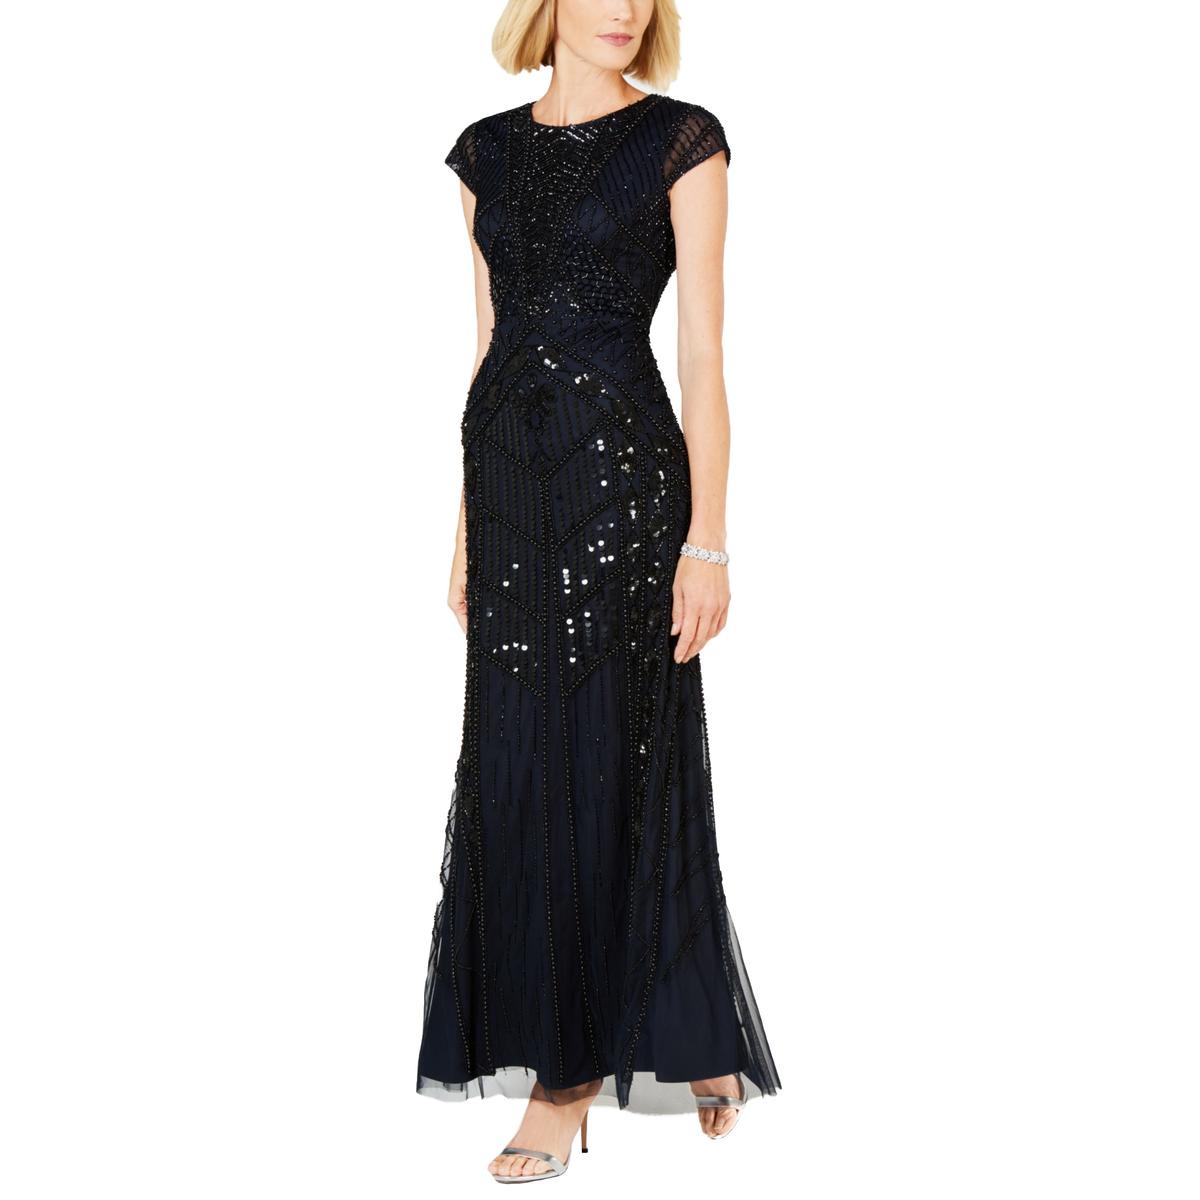 Adrianna Papell Womens Navy Embellished Formal Evening Dress Gown 10 ...